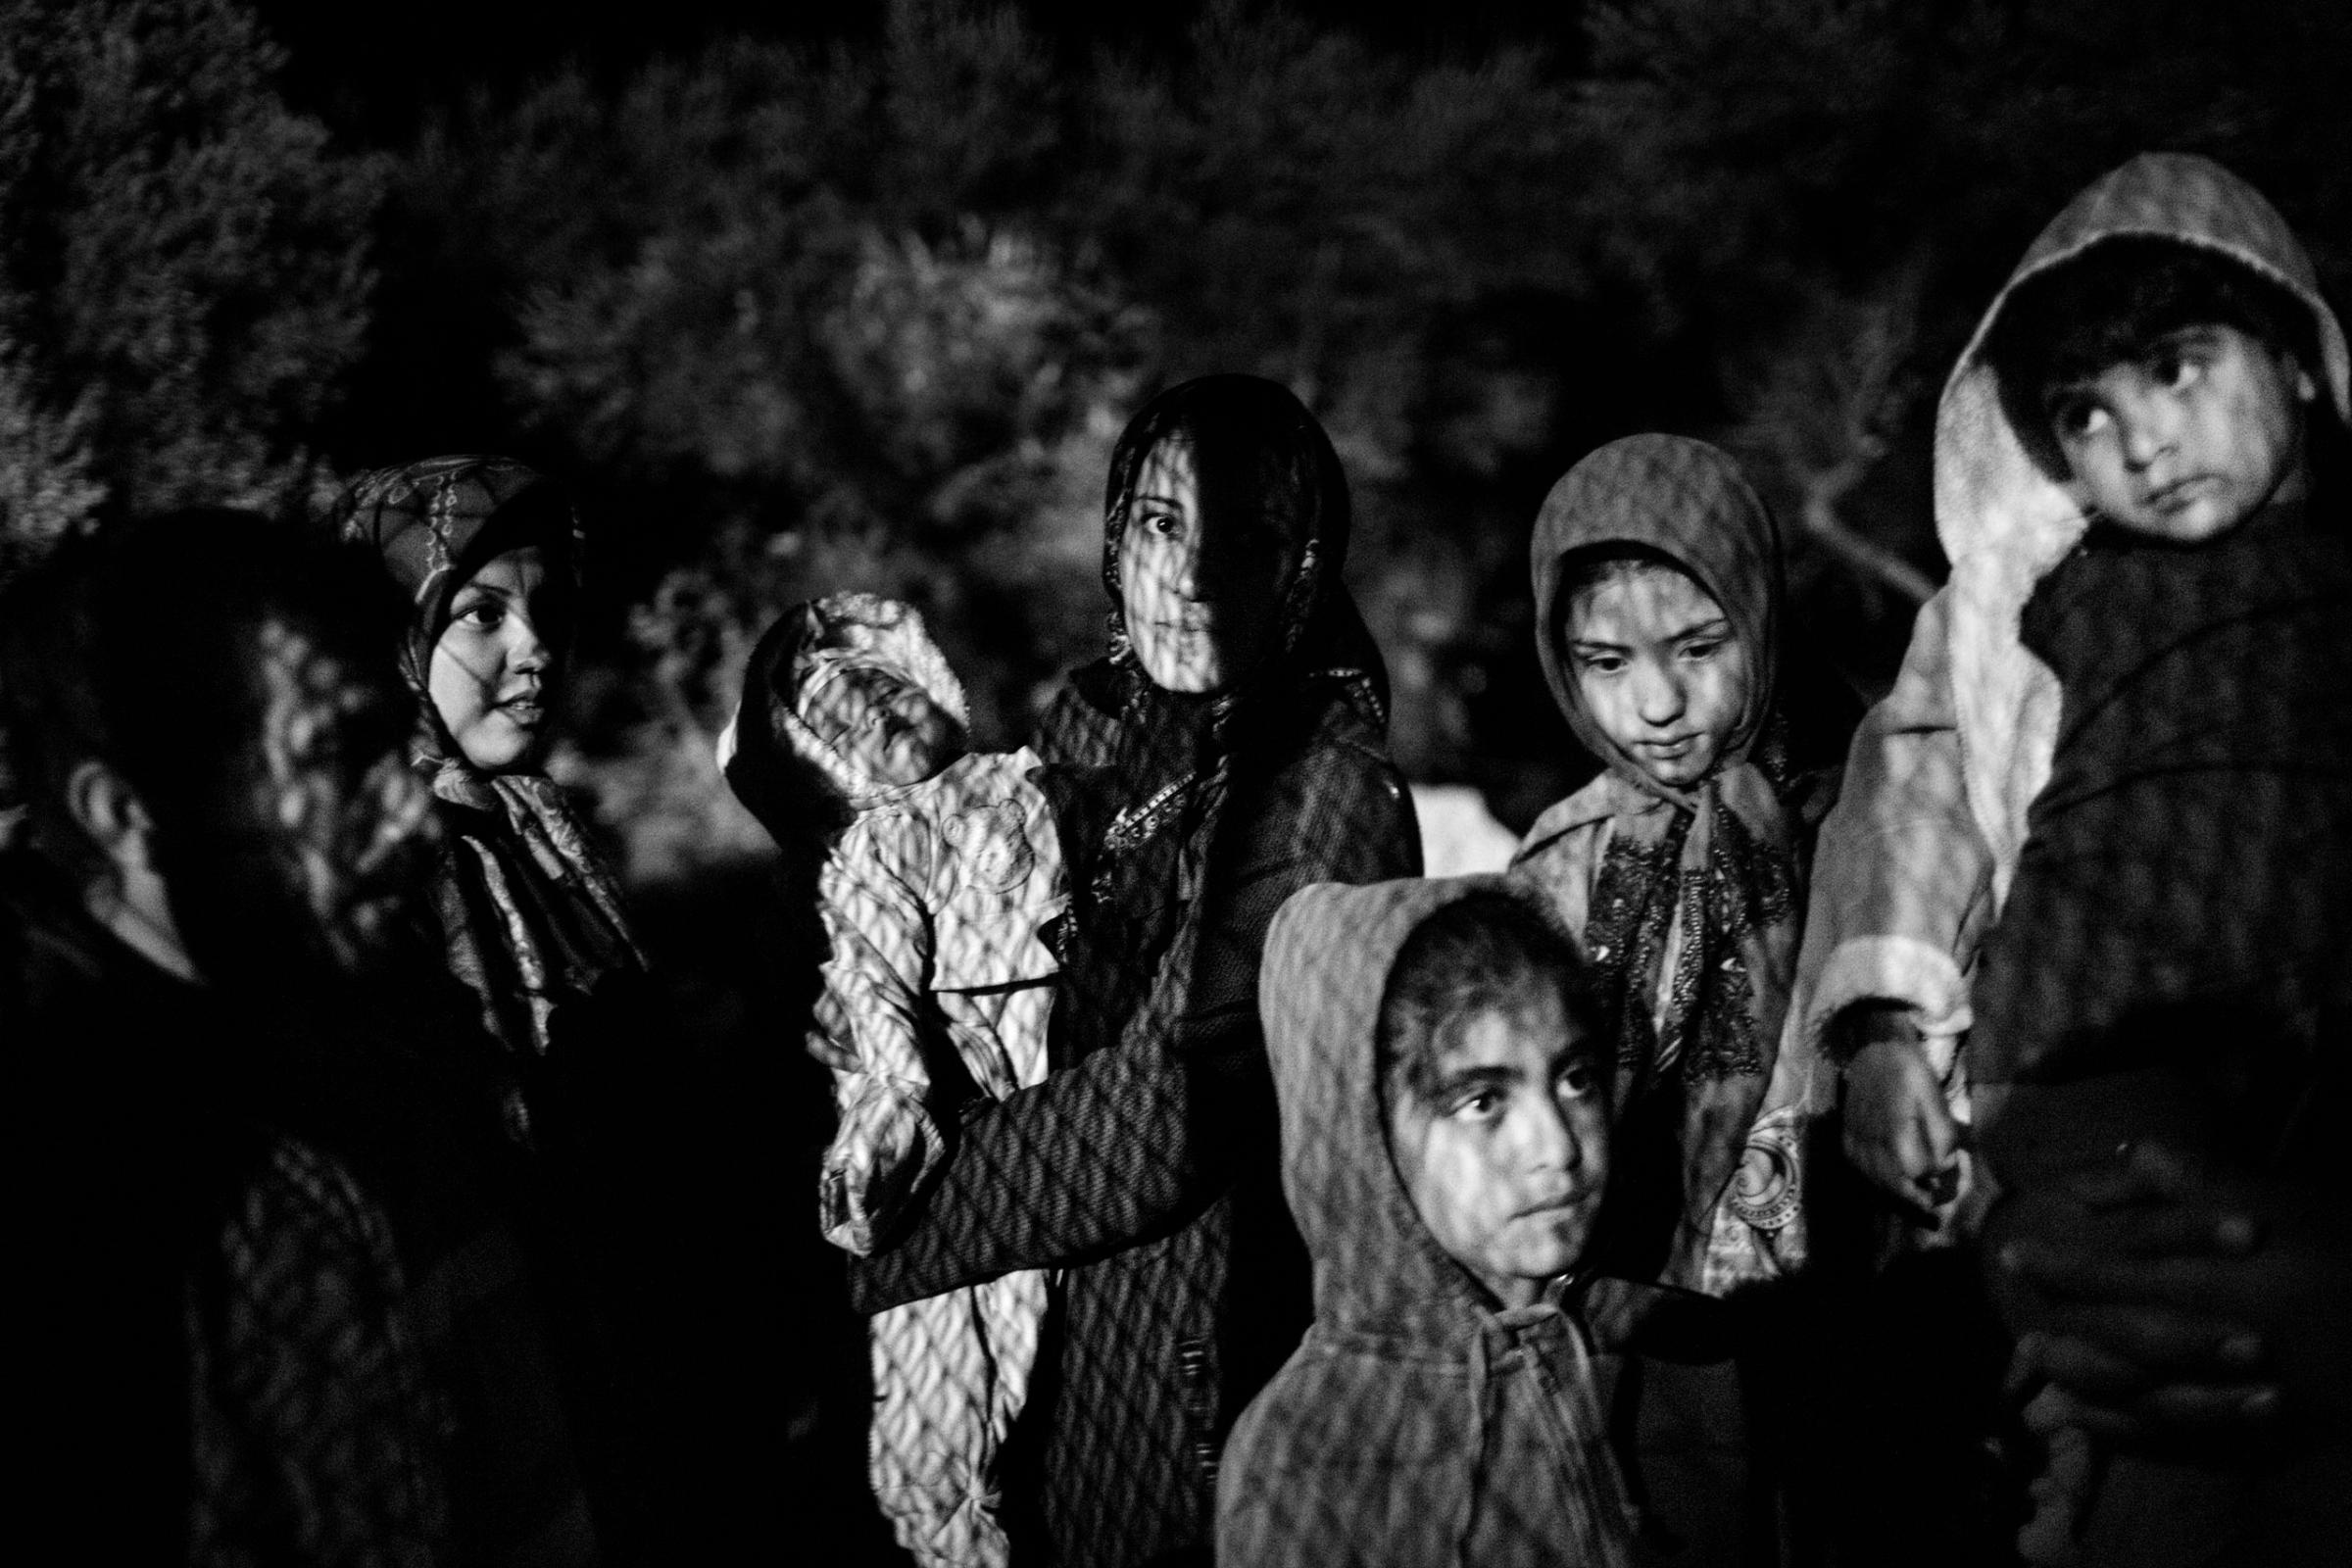 Afghan refugees wait to be registered on the Greek island of Lesbos, Oct. 12, 2015.